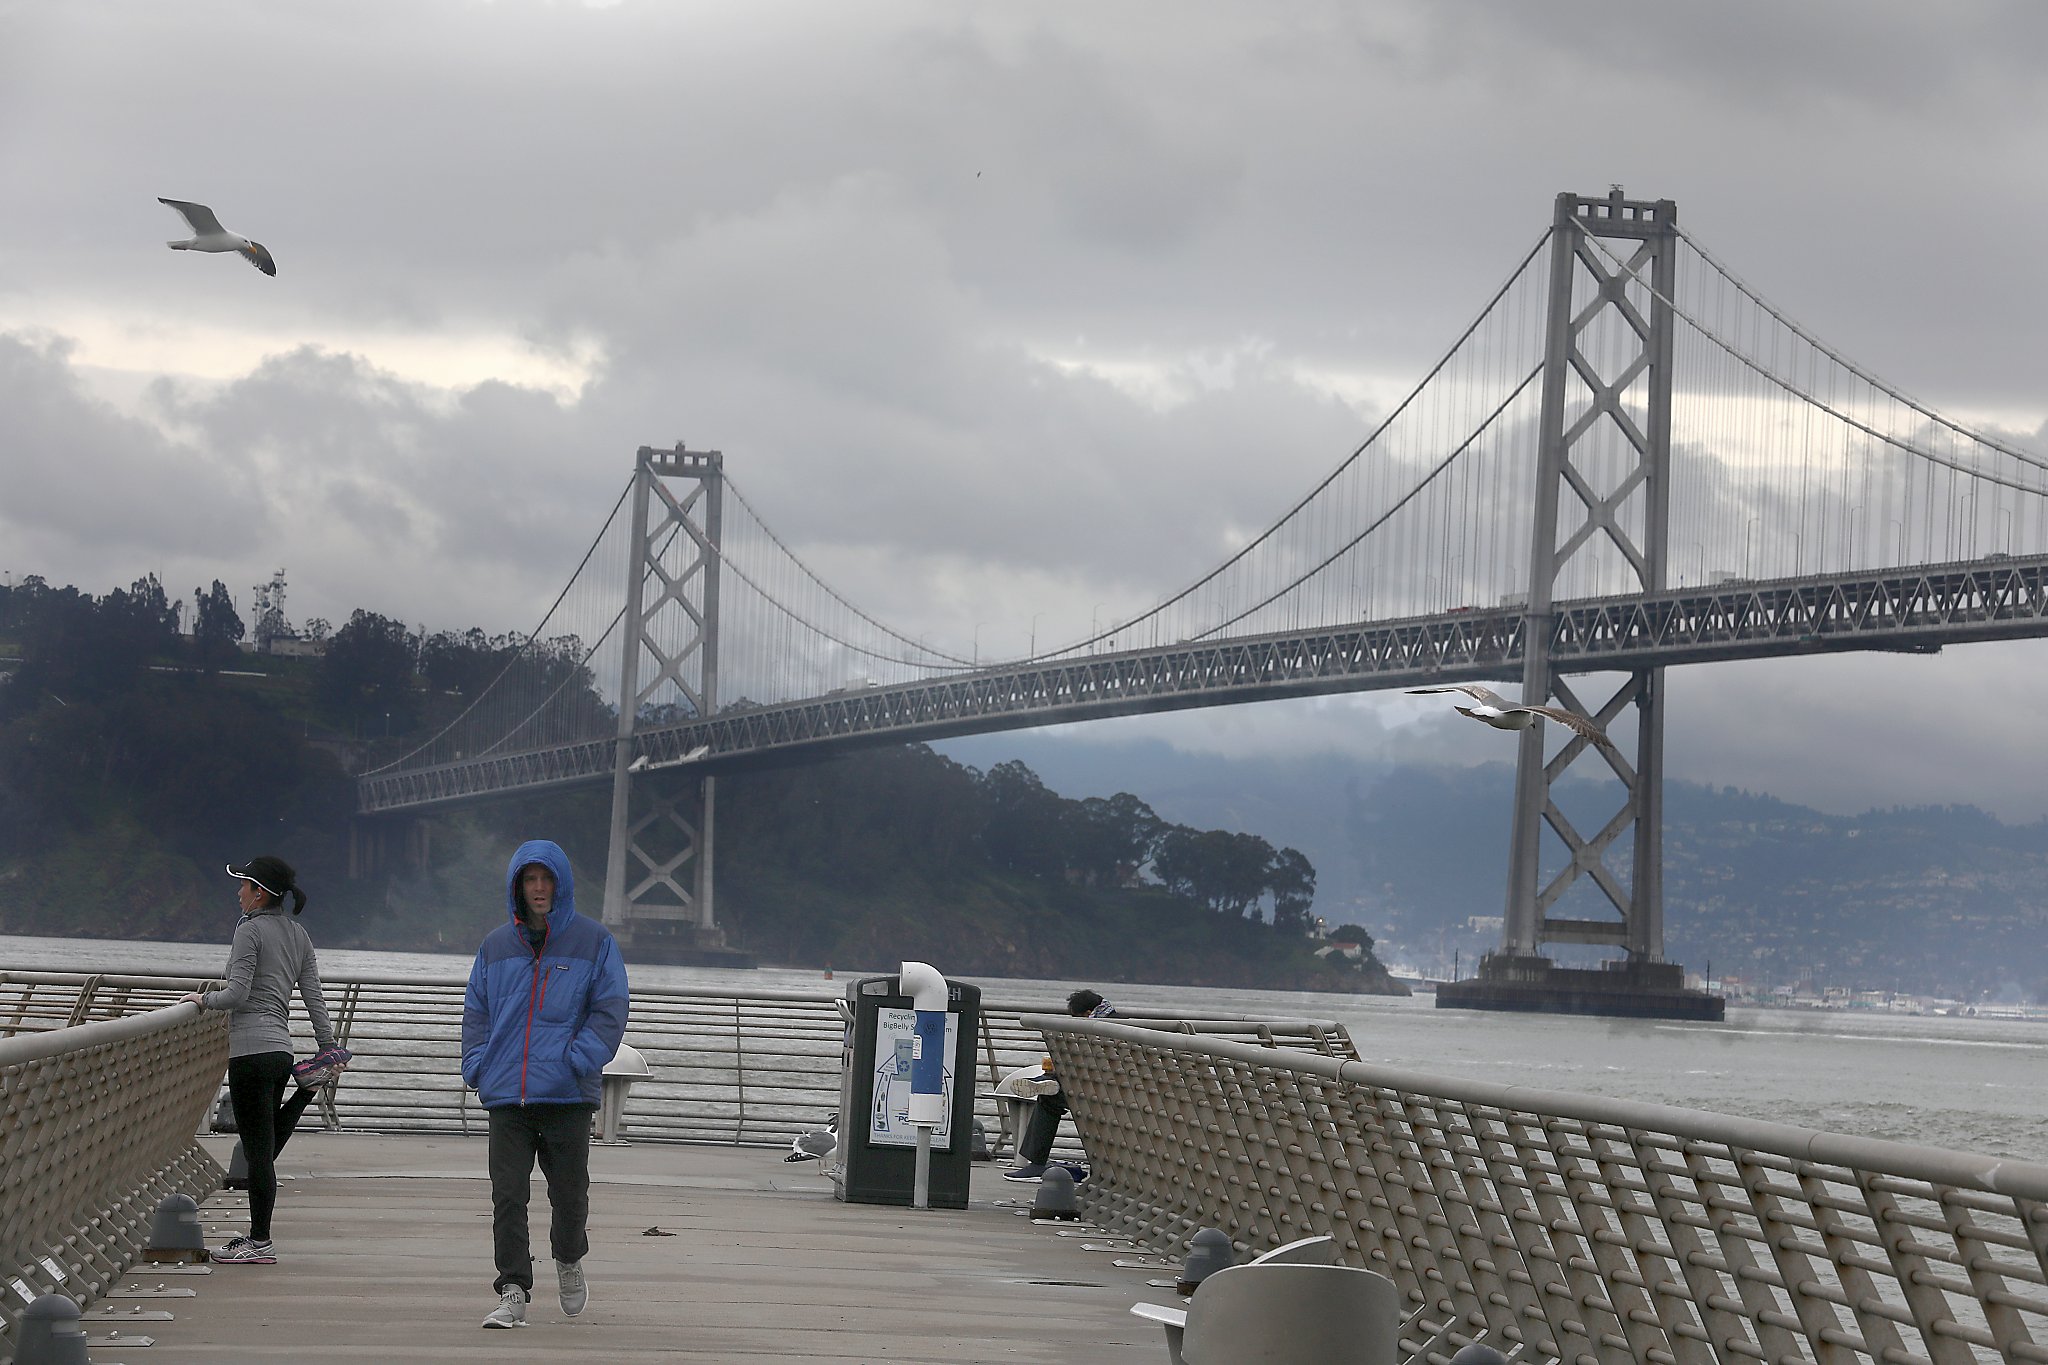 7day San Francisco Bay Area weather forecast 'Overall it looks like